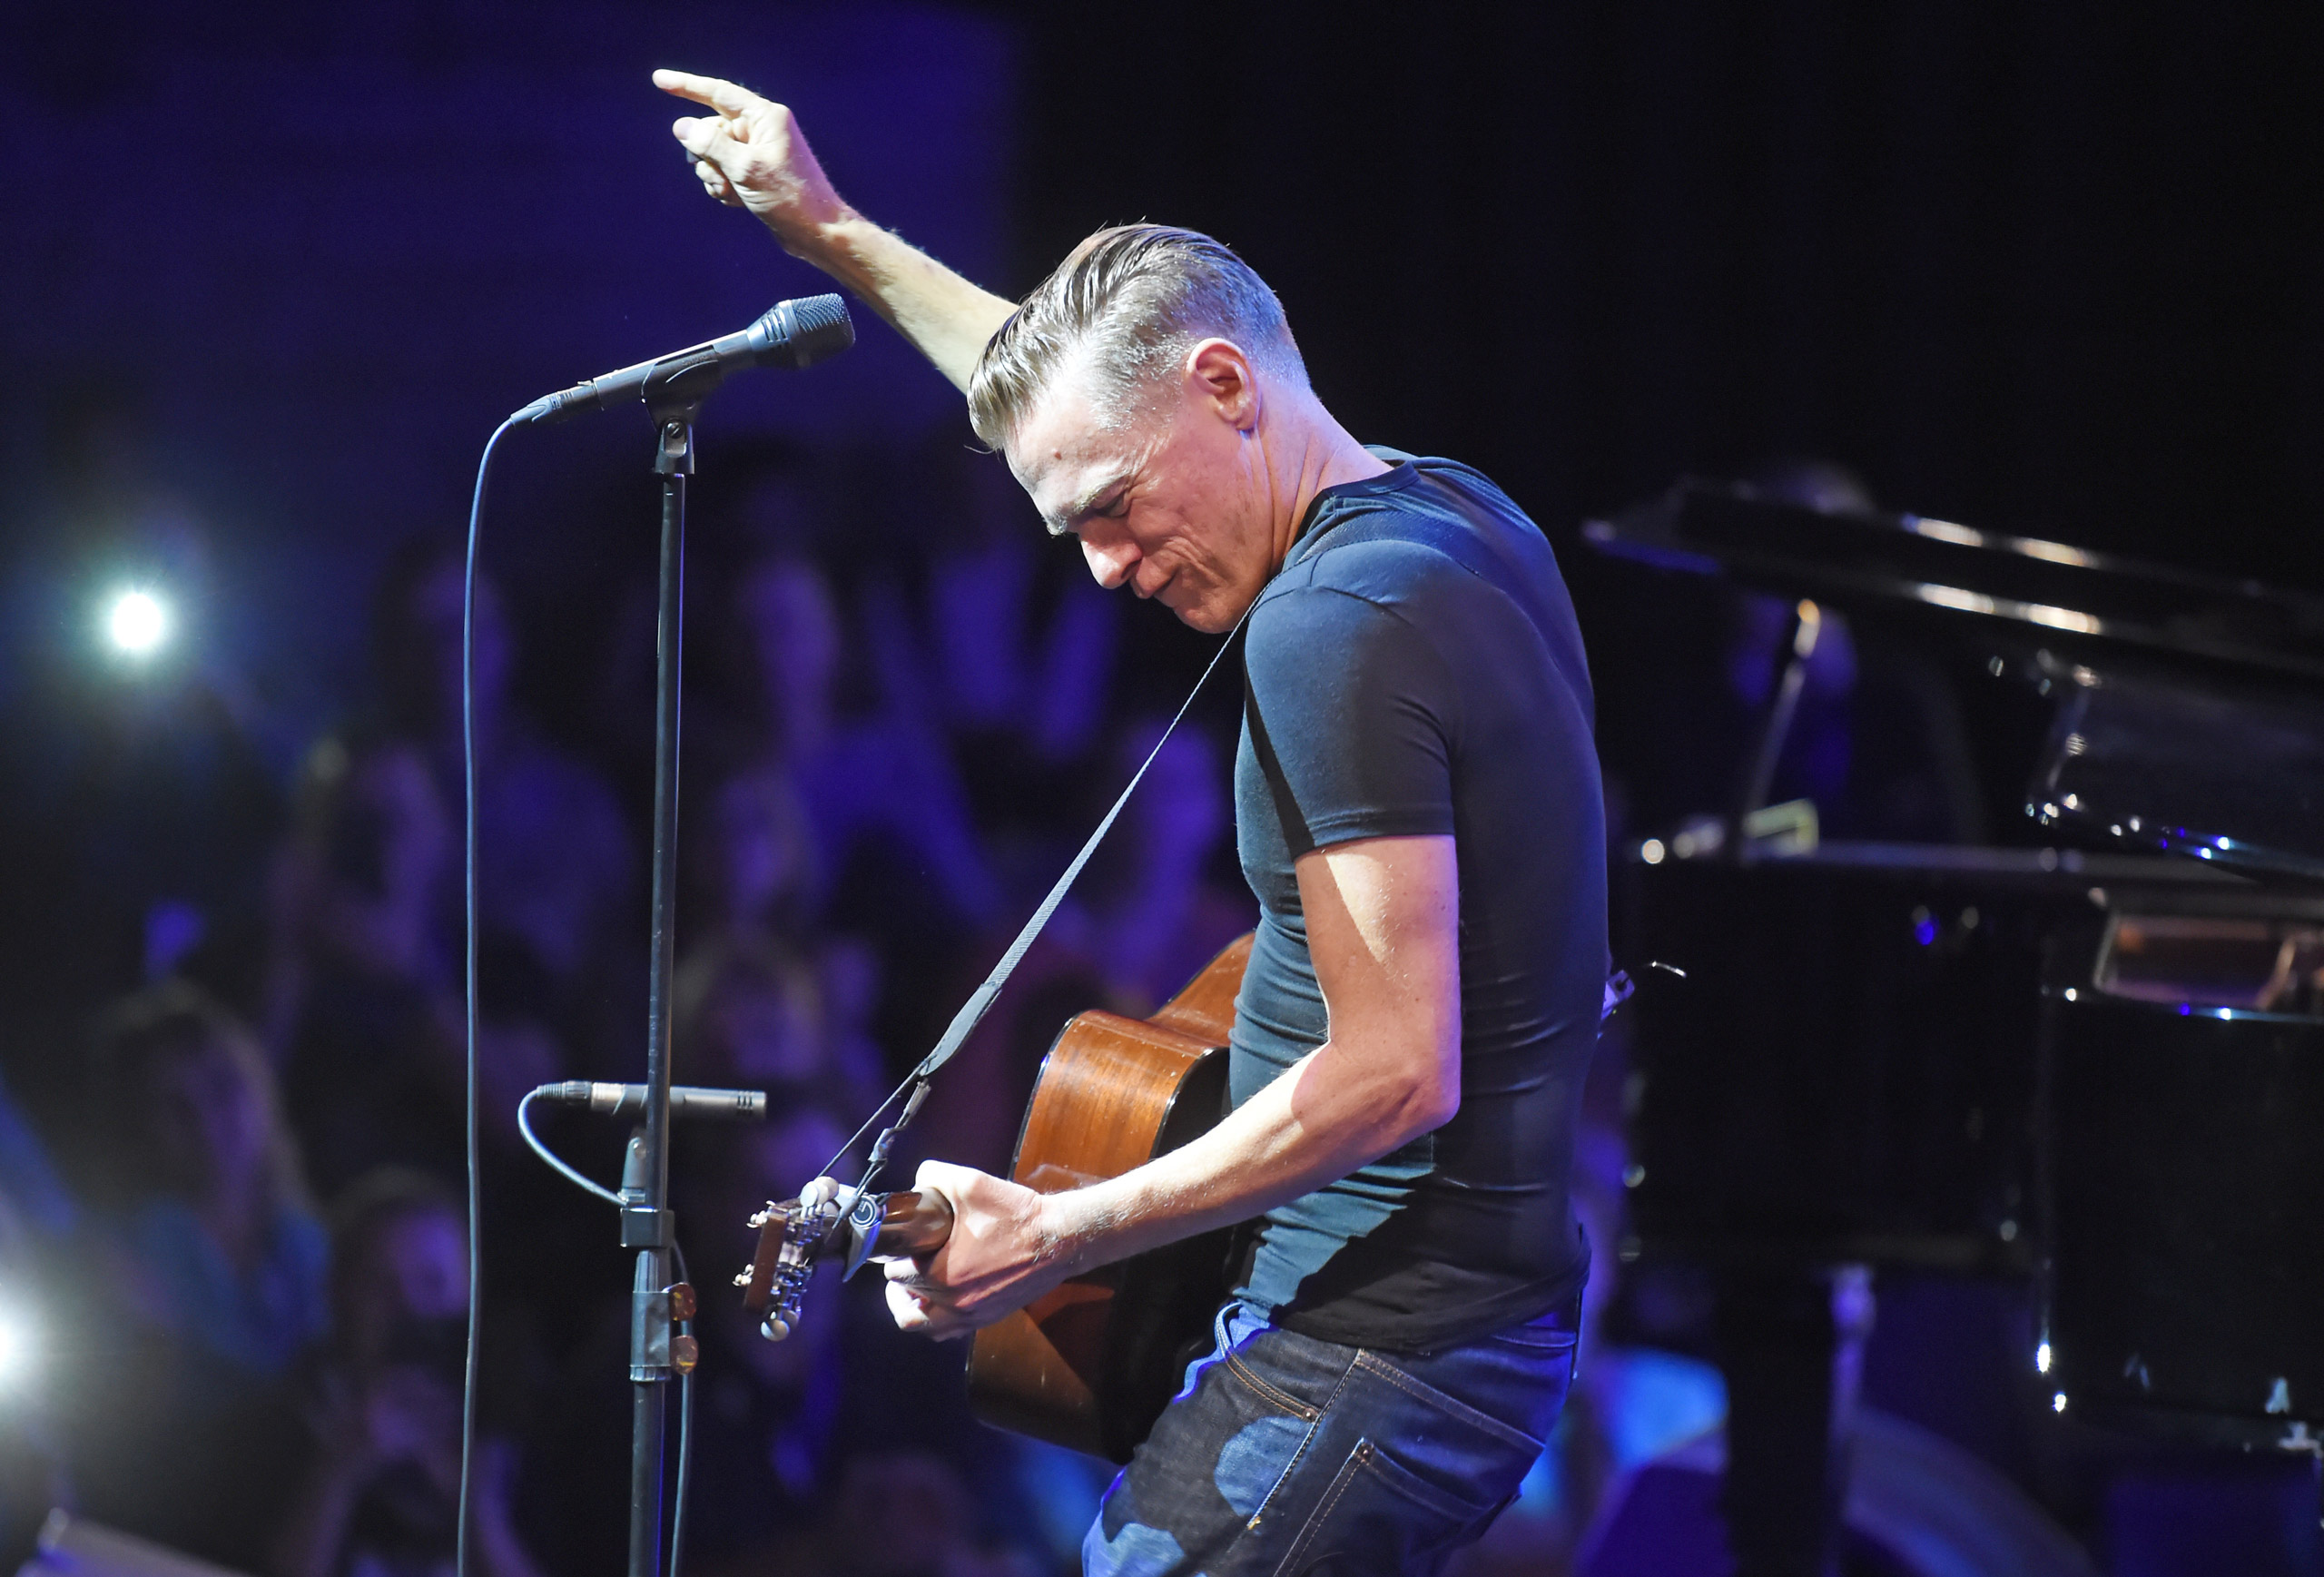 Canadian rock singer and musician Bryan Adams performs on the Badisches Staatstheater theatre in Karlsruhe, Germany, 13 October 2015. The occasion is a private concert from radio station Radio Regenbogen. Photo by: Uli Deck/picture-alliance/dpa/AP Images